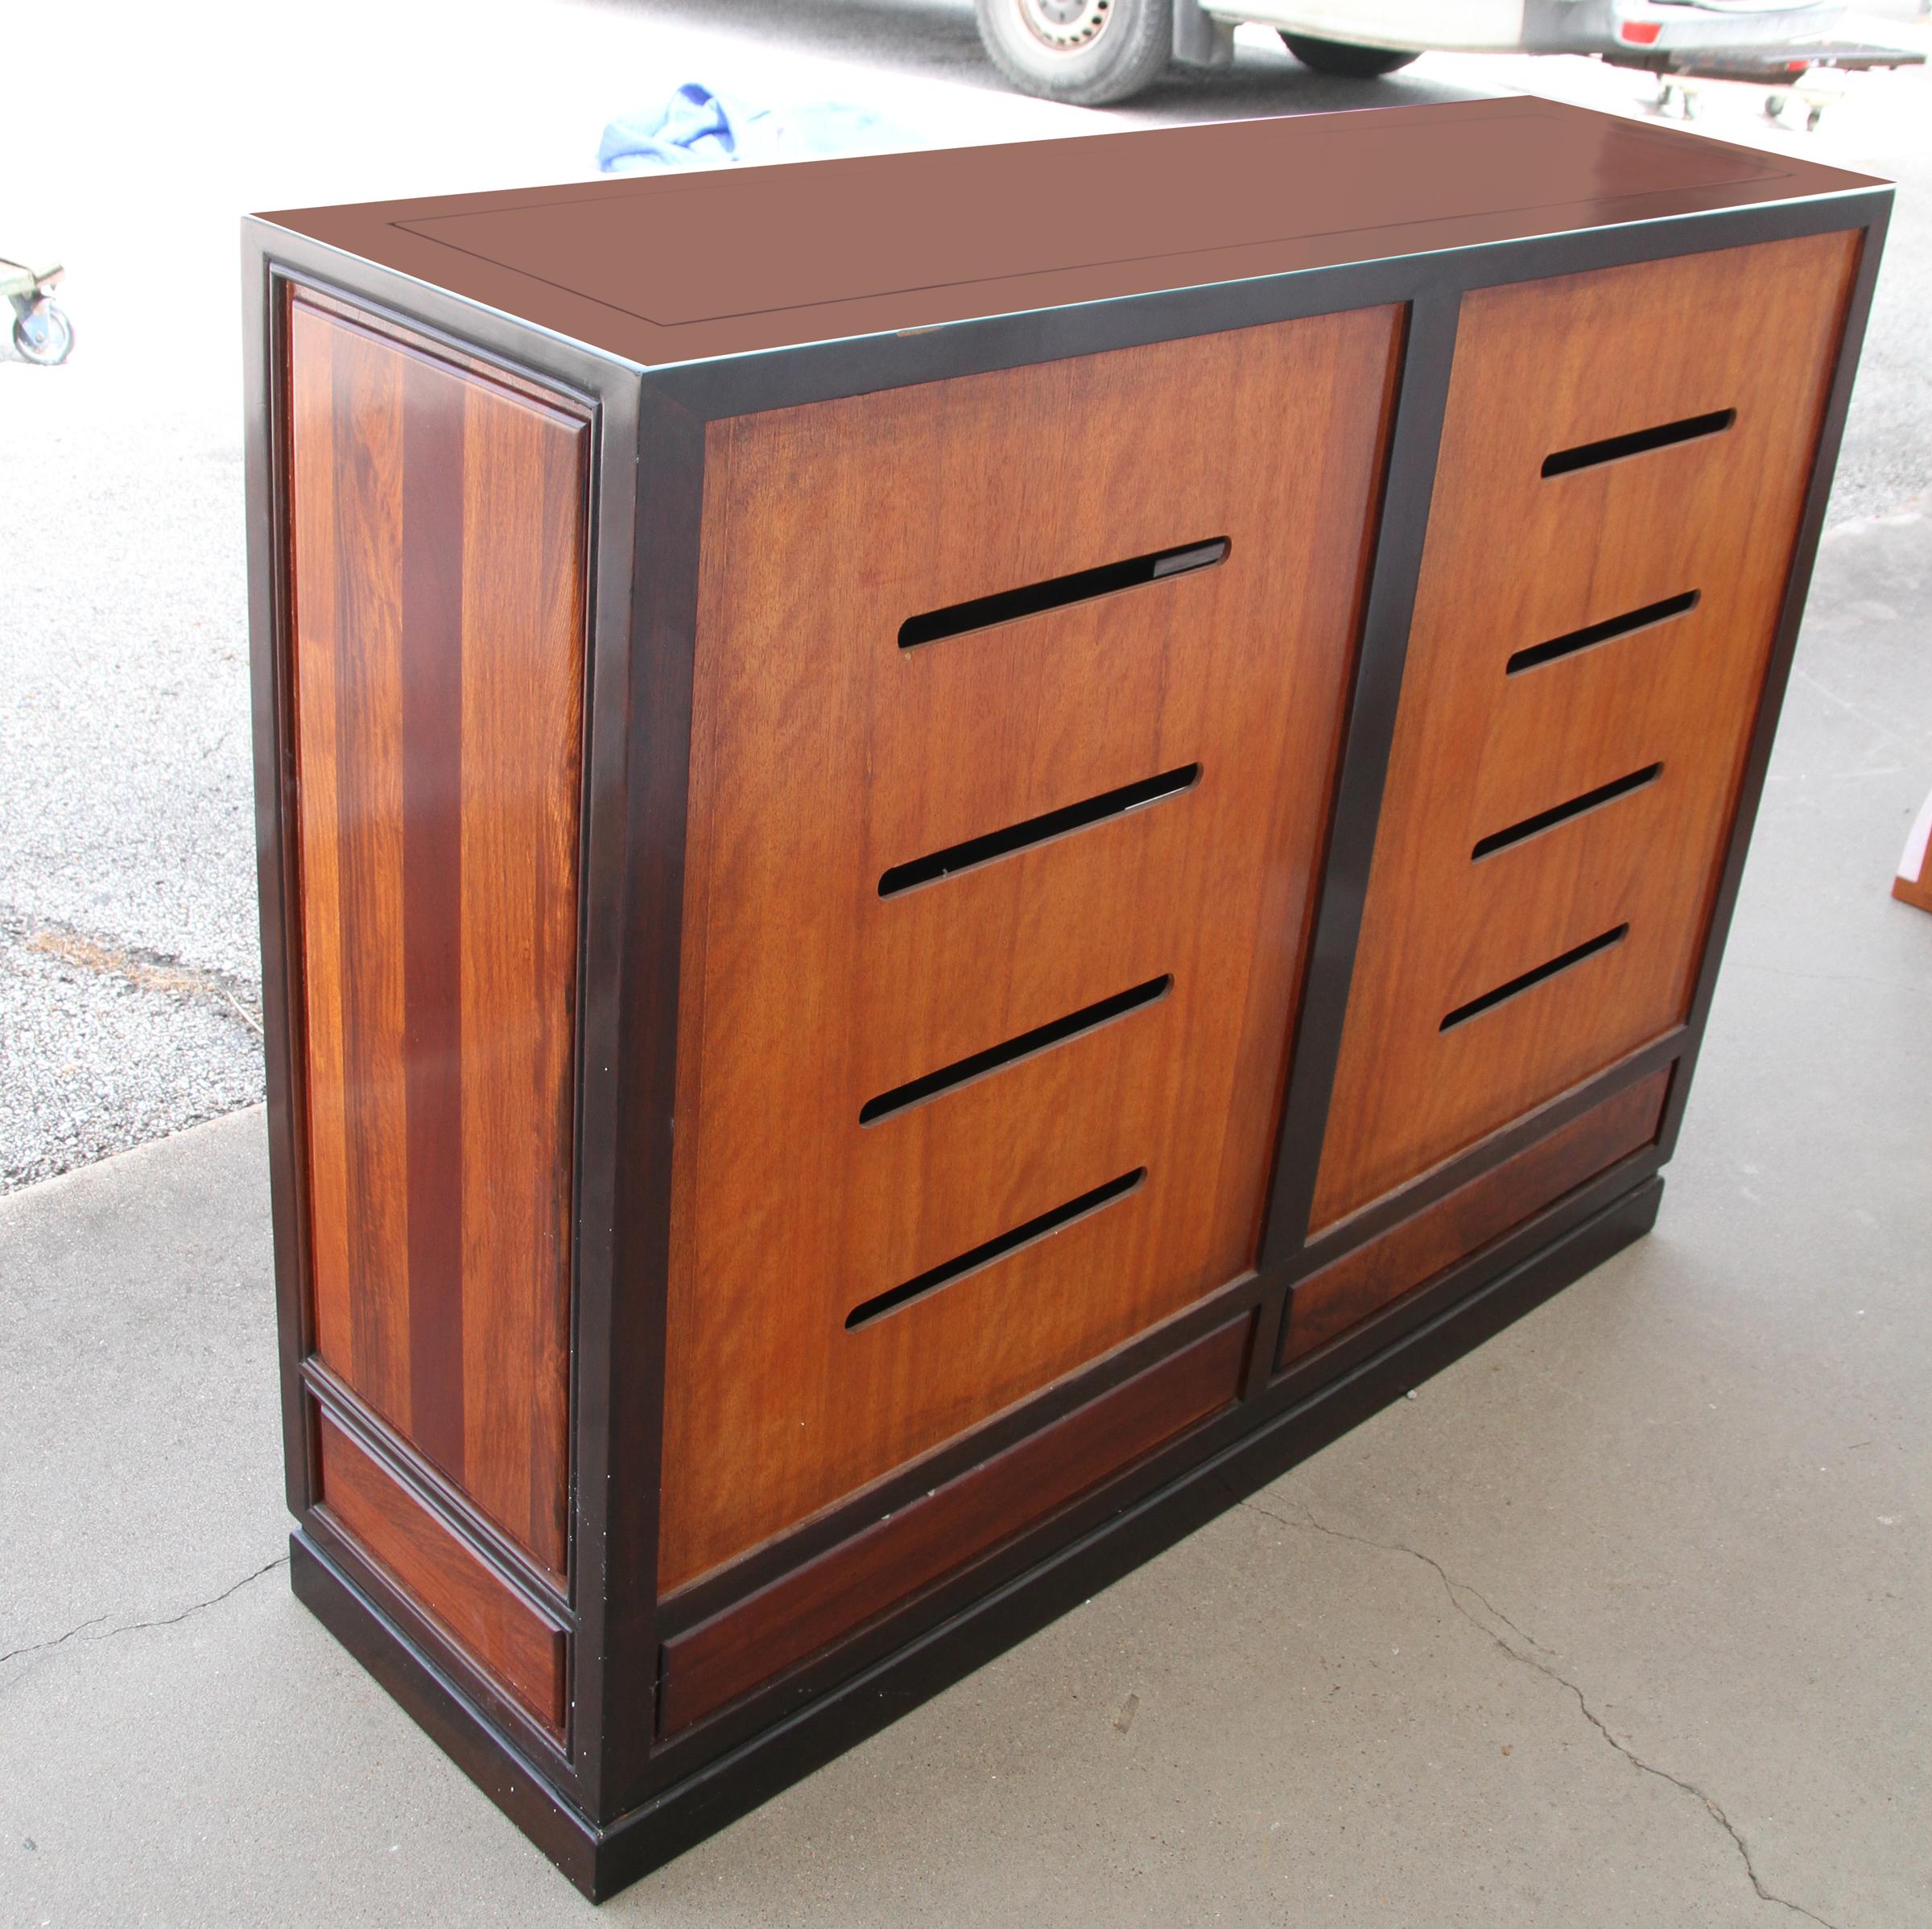 Teak Contemporary Japanese Style Getabako Shoe Cabinet from Thailand For Sale